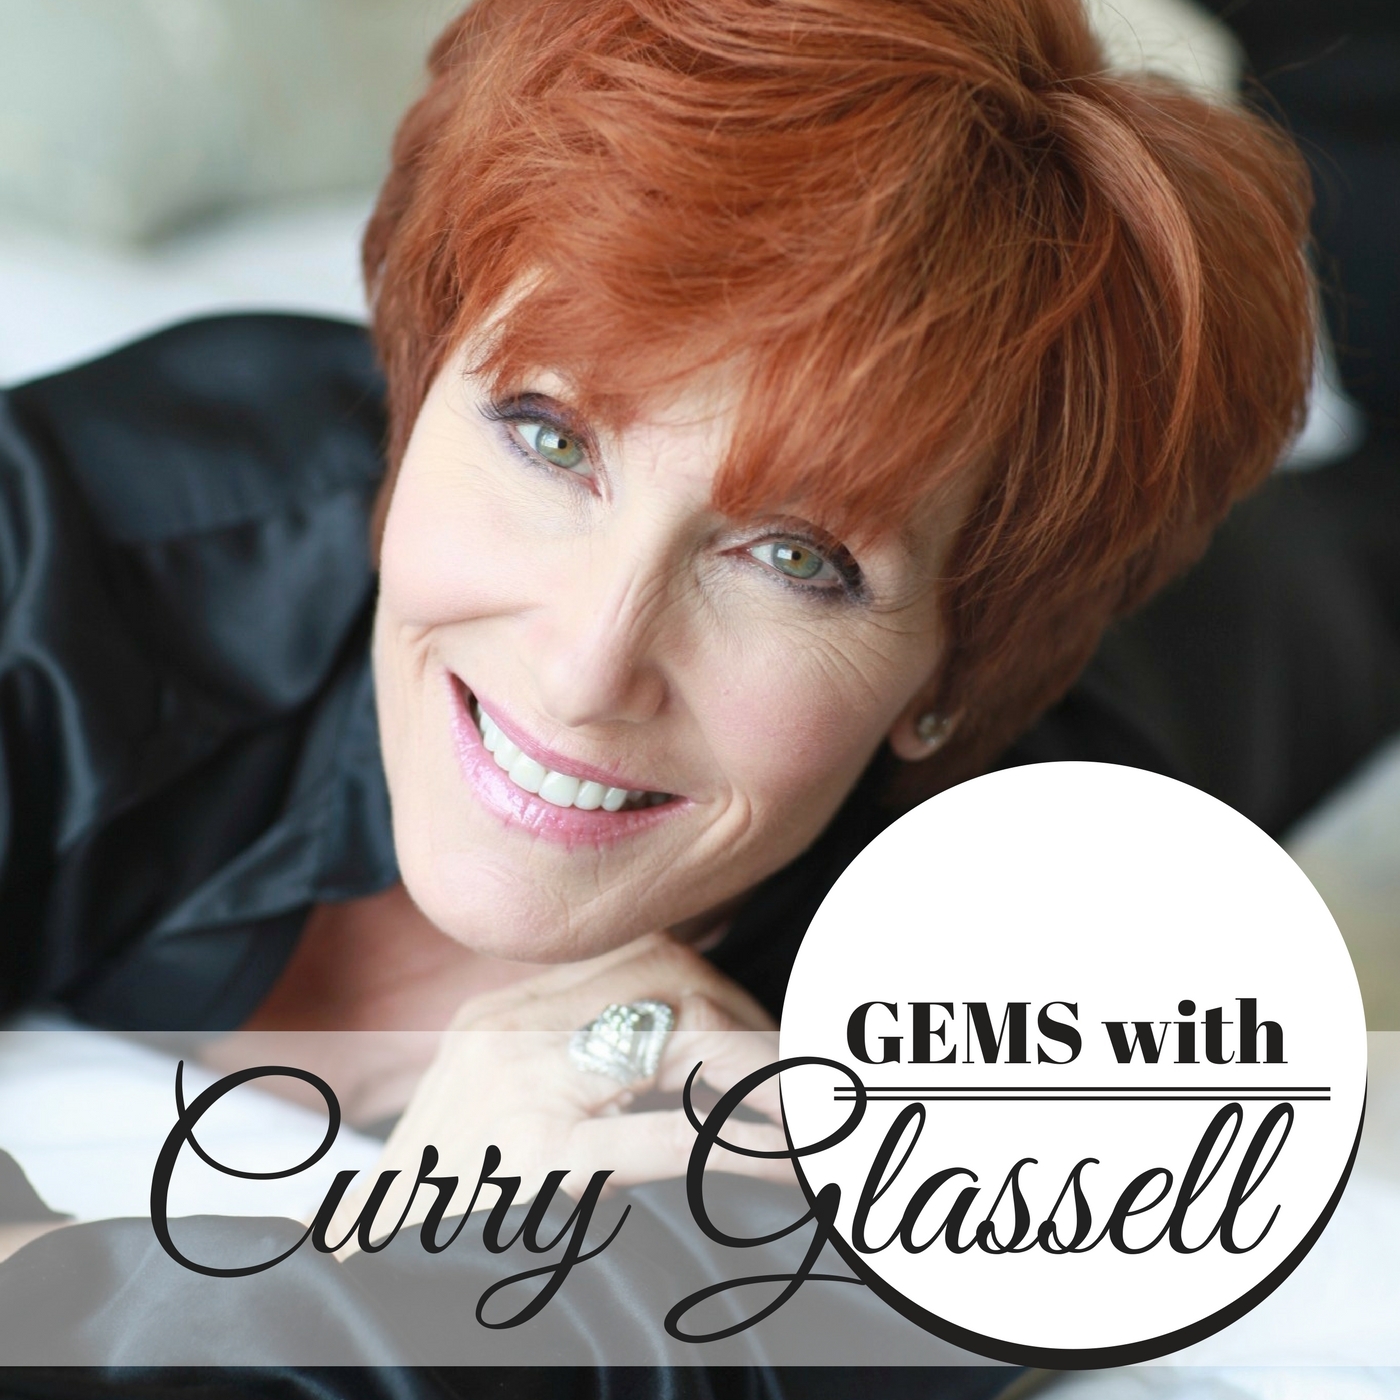 GEMS with Curry Glassell ”Invitation to New Point of View on Money and LIFE” Podcast #201